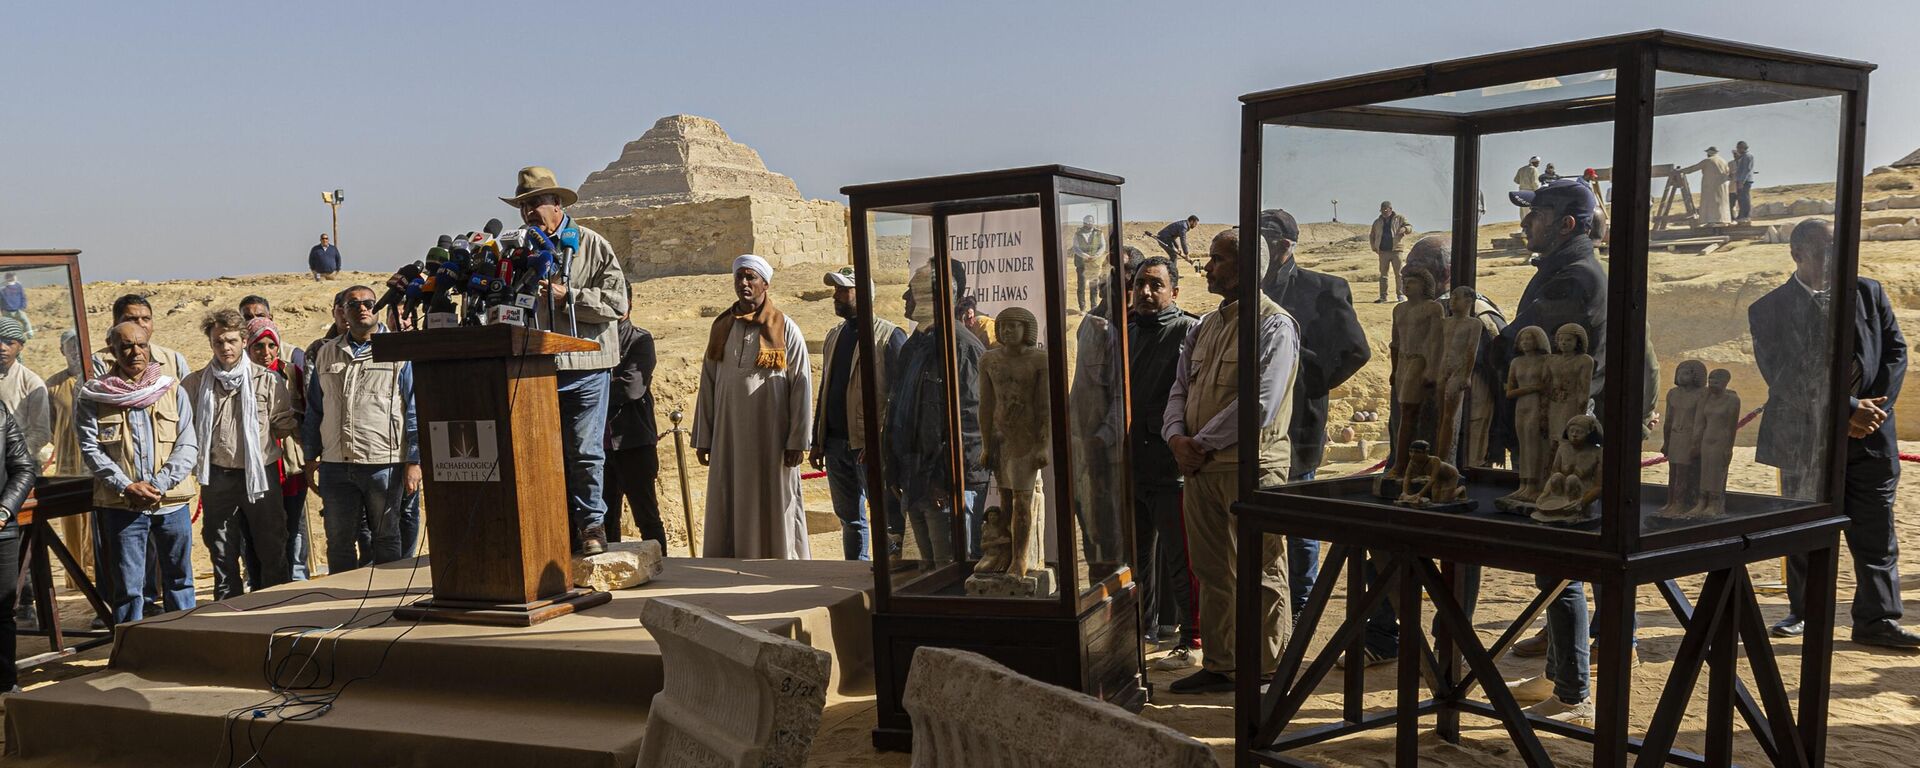 Archaeologist and Egypt's former antiquities minister Zahi Hawass holds a press conference in the Saqqara necropolis, where a gold-laced mummy and four tombs including of an ancient king's secret keeper were discovered, south of Cairo on January 26, 2023. - Sputnik Africa, 1920, 10.09.2023